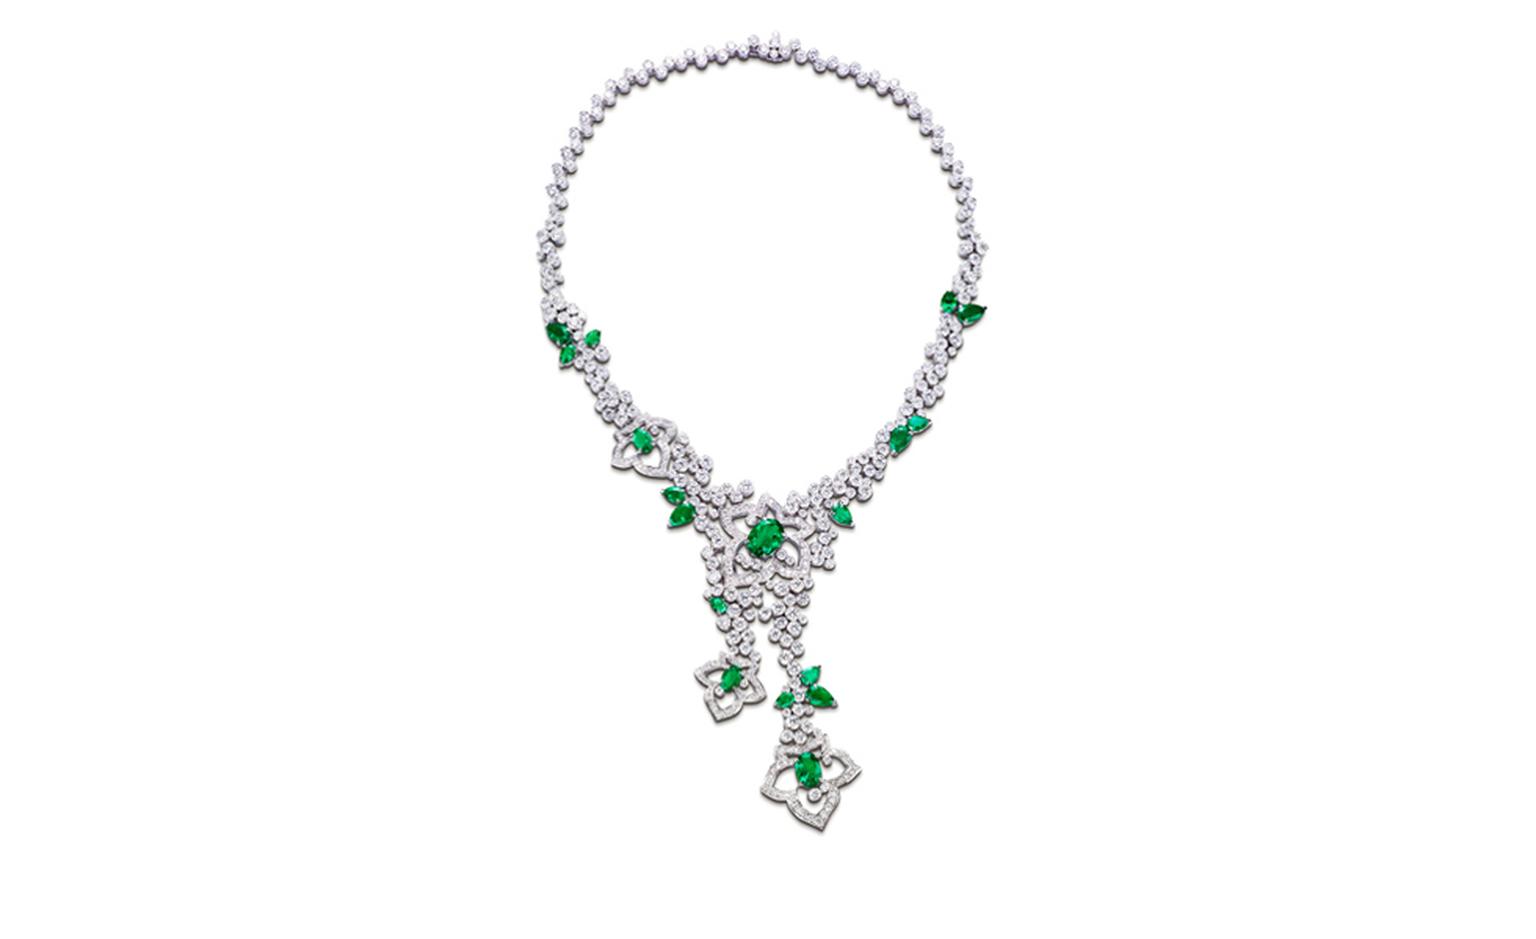 PIAGET, Limelight Garden Party, White gold necklace set with diamonds and emeralds. POA